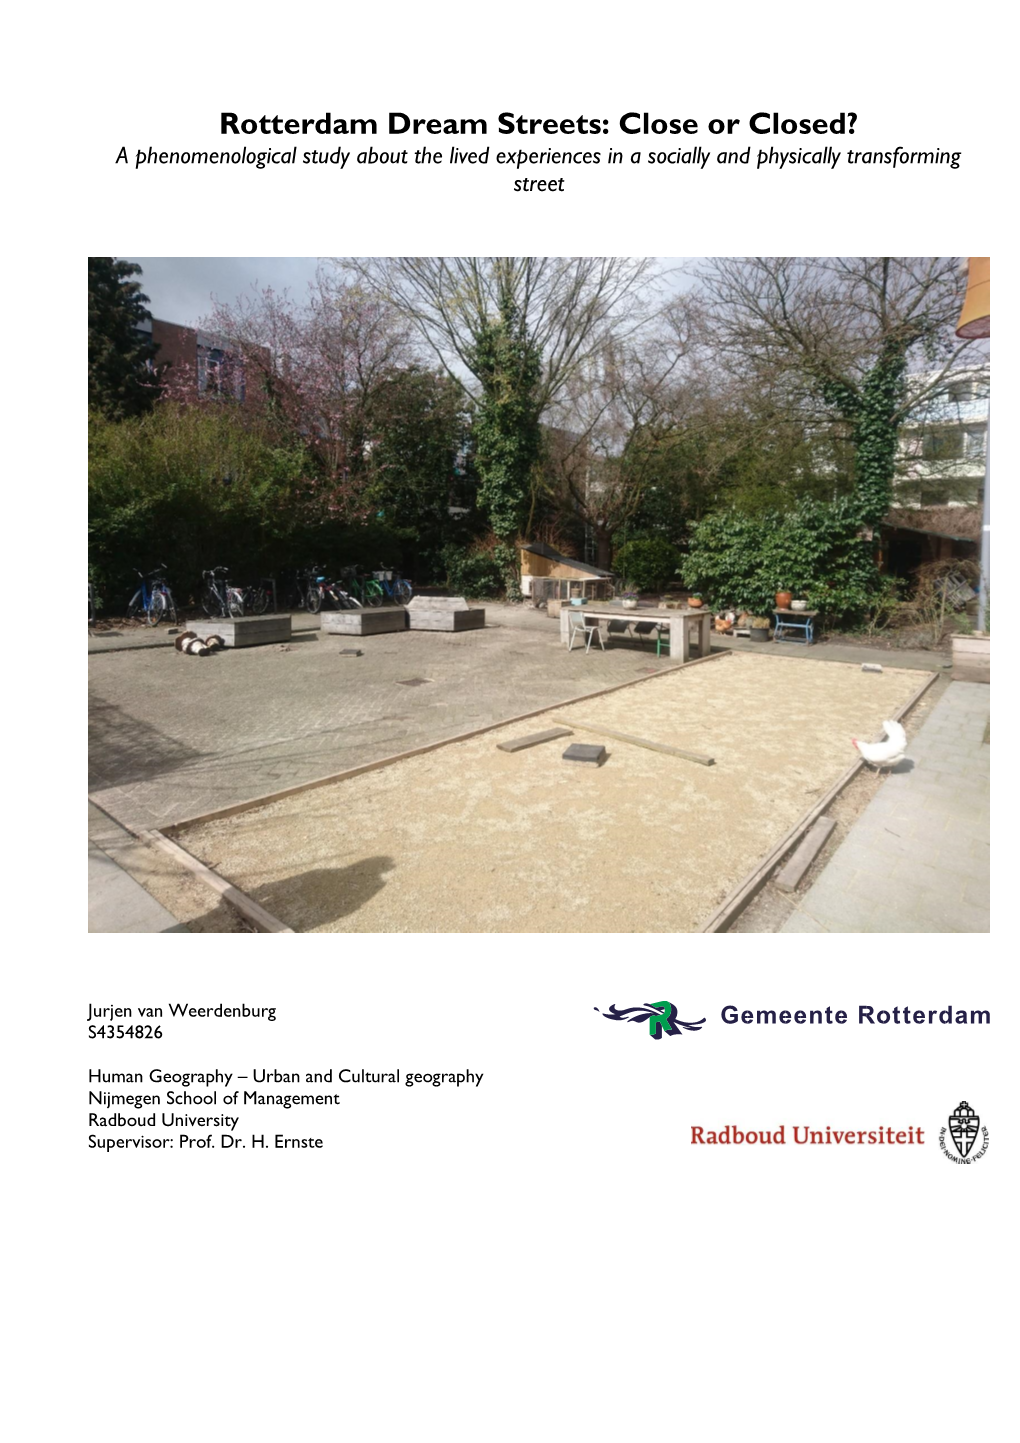 Rotterdam Dream Streets: Close Or Closed? a Phenomenological Study About the Lived Experiences in a Socially and Physically Transforming Street